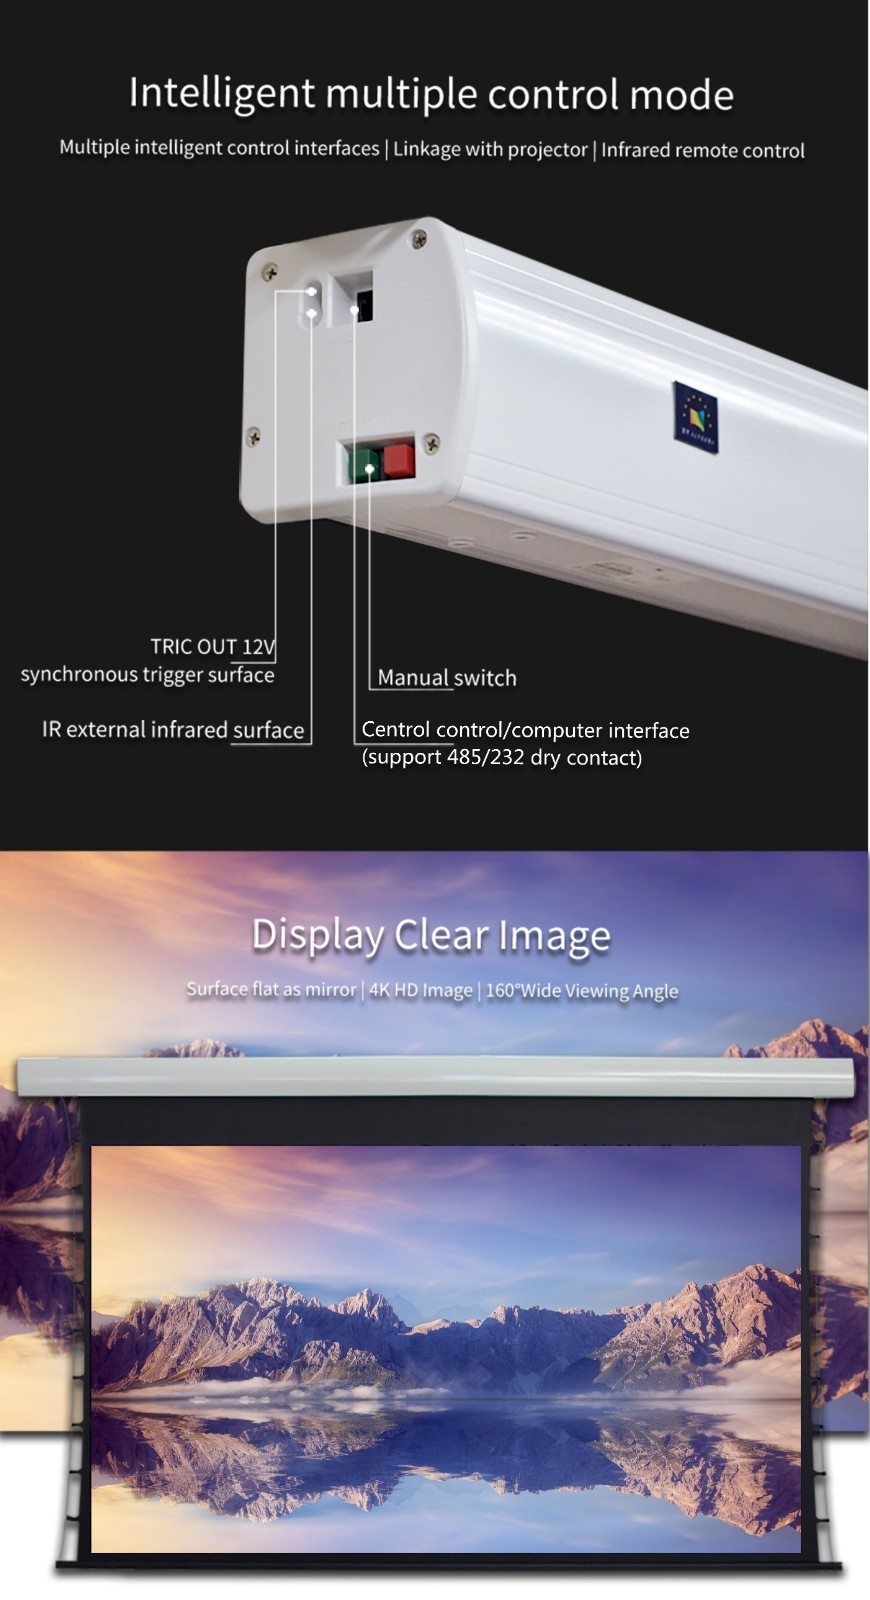 XY Screens curved Motorized Projection Screen supplier for rooms